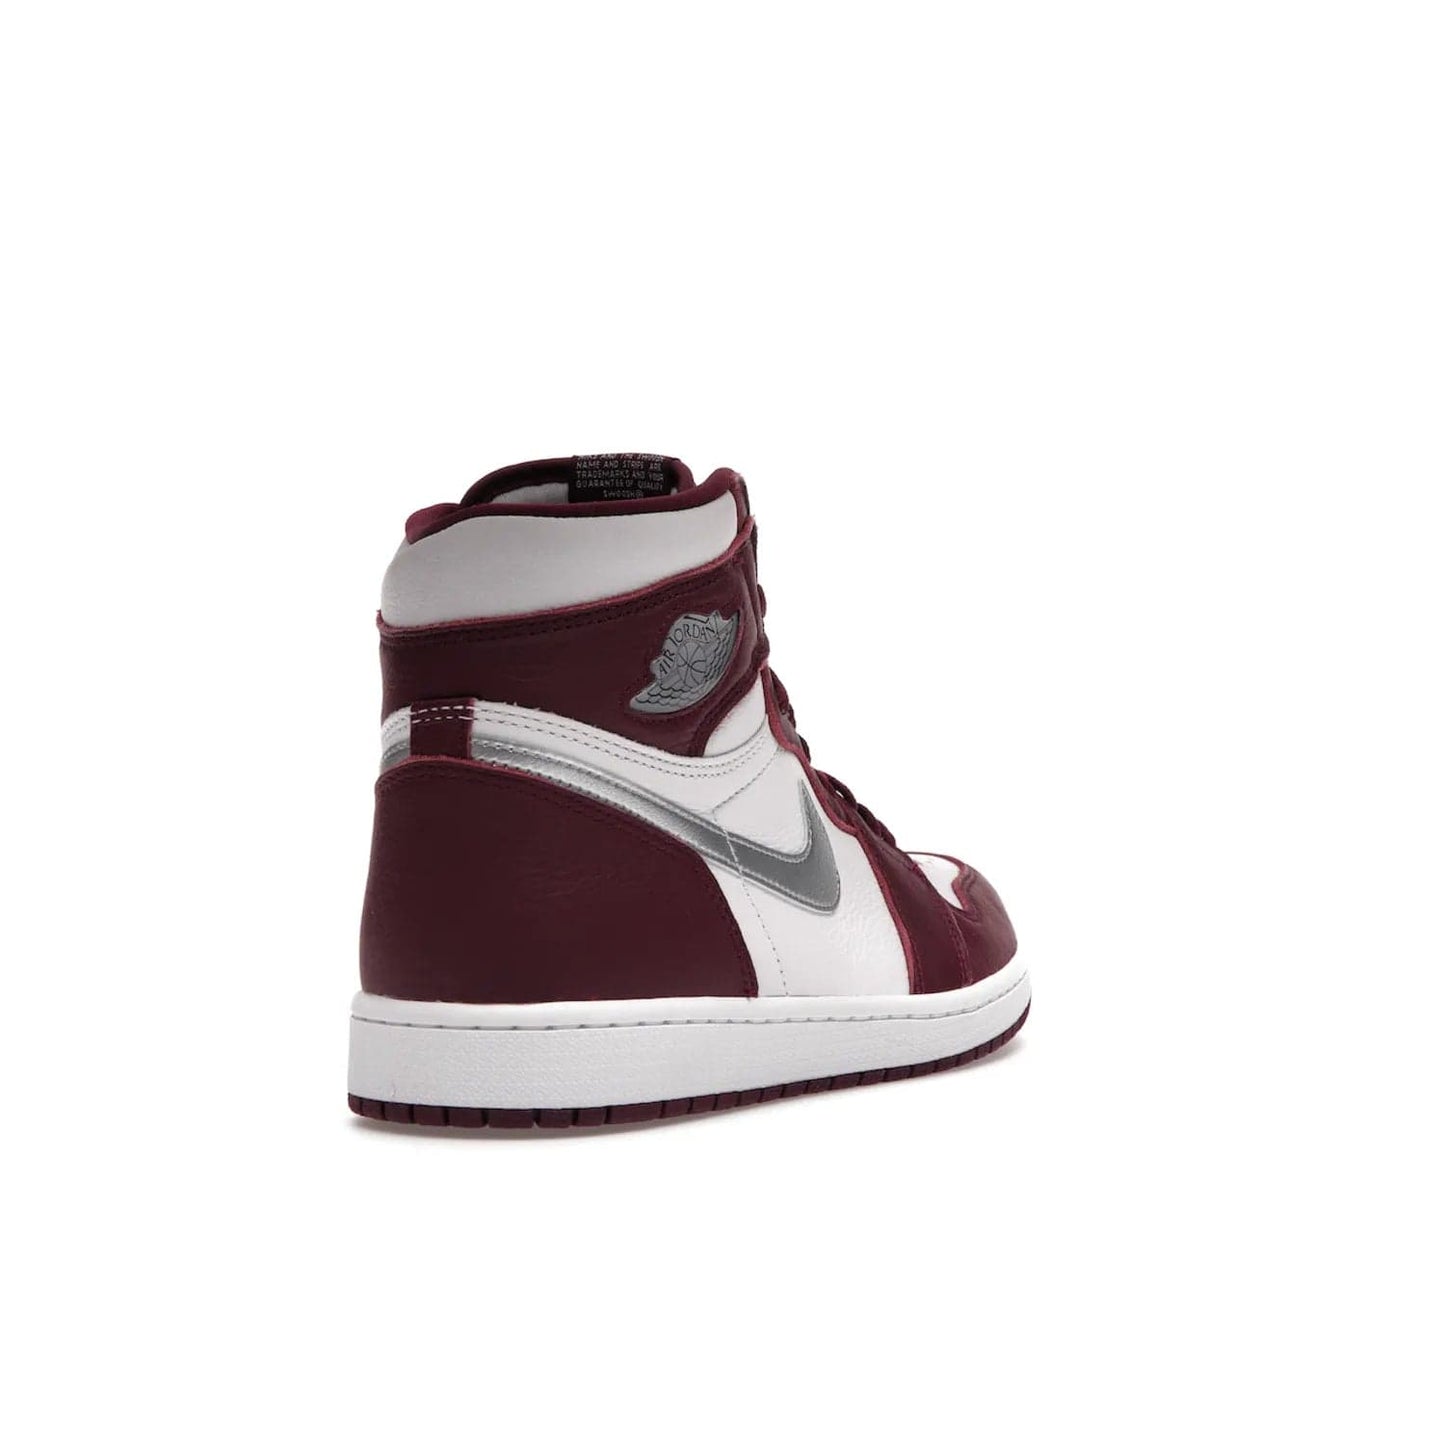 Jordan 1 Retro High OG Bordeaux - Image 31 - Only at www.BallersClubKickz.com - Shop the classic Air Jordan 1 High Bordeaux with a modern high-top cut. The timeless Bordeaux and White-Metallic Silver colorway, releasing Nov 20, 2021, is perfect for practice or a night out.